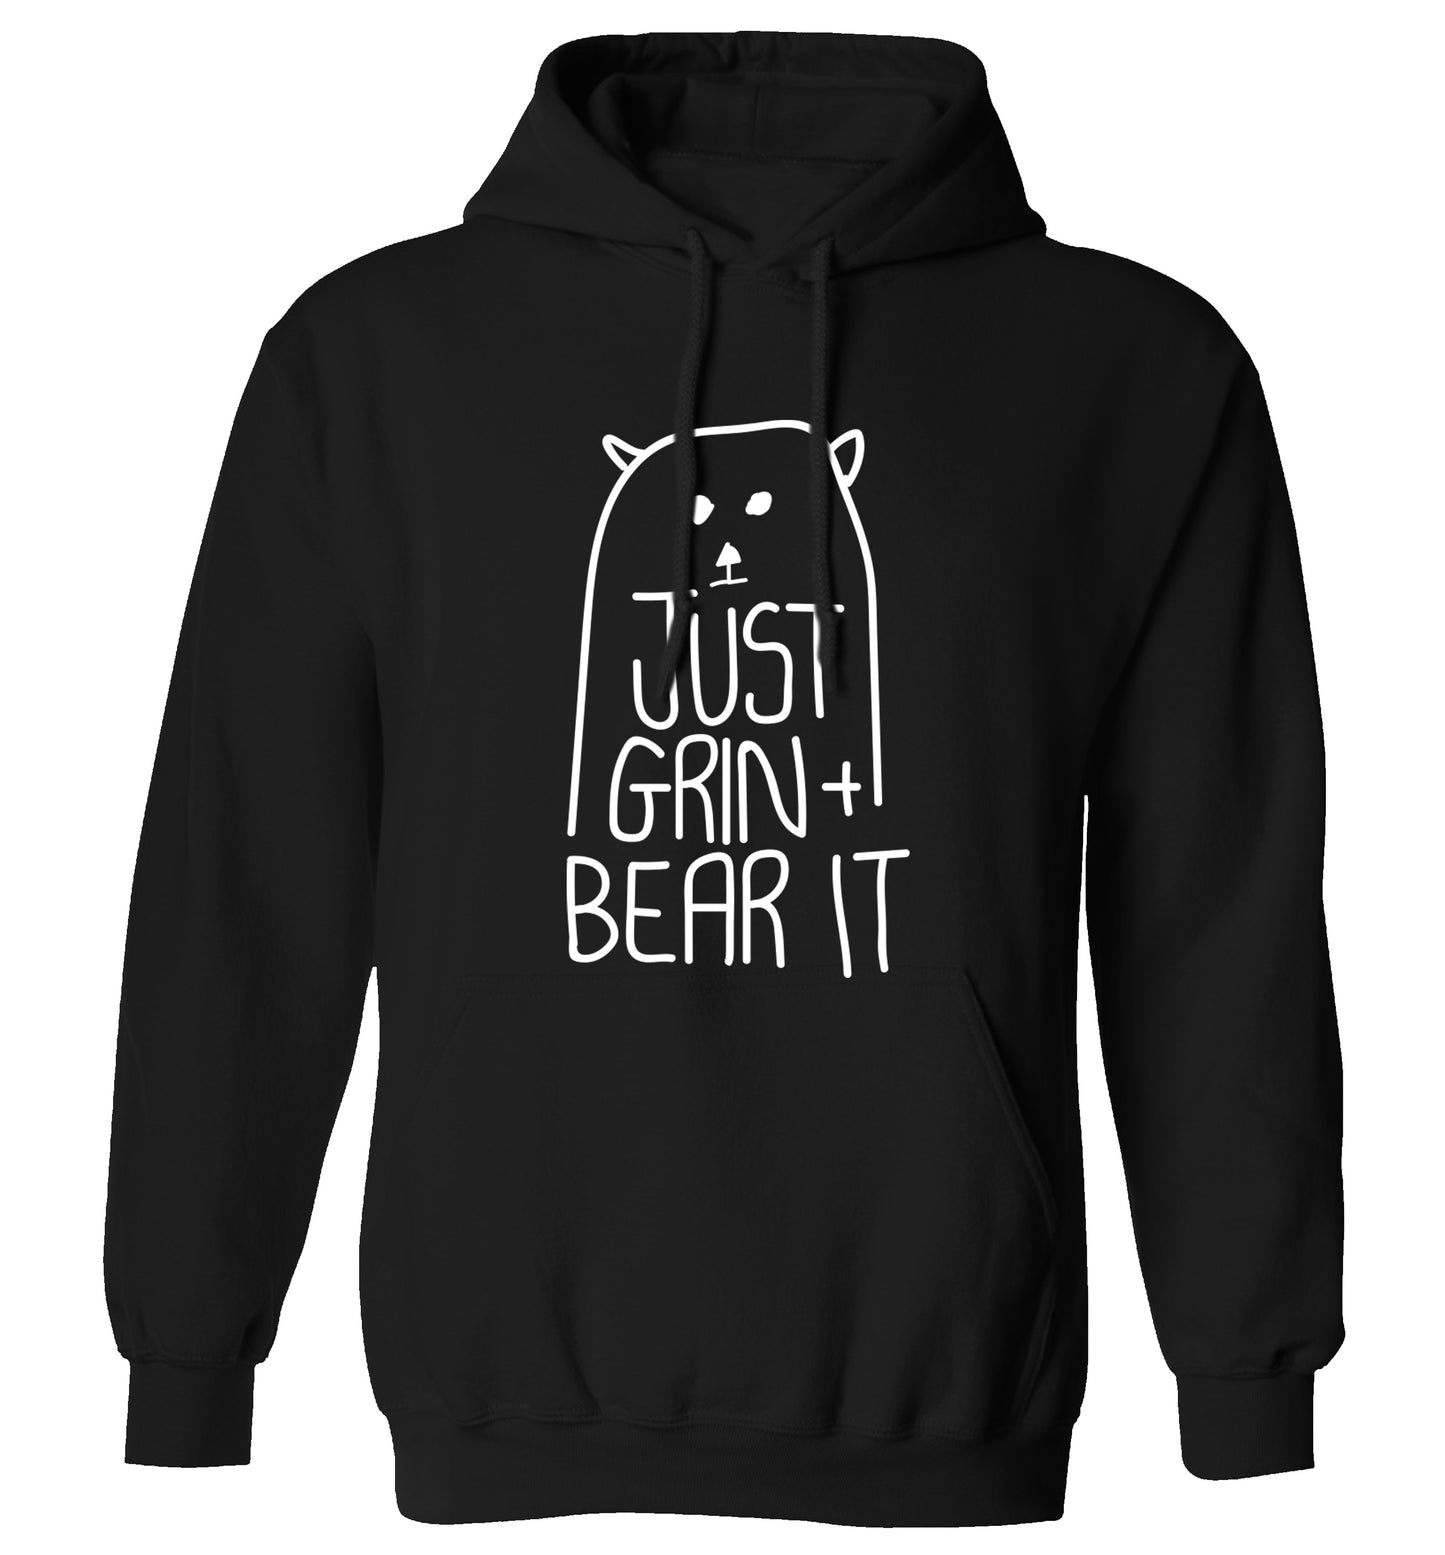 Just grin and bear it adults unisex black hoodie 2XL